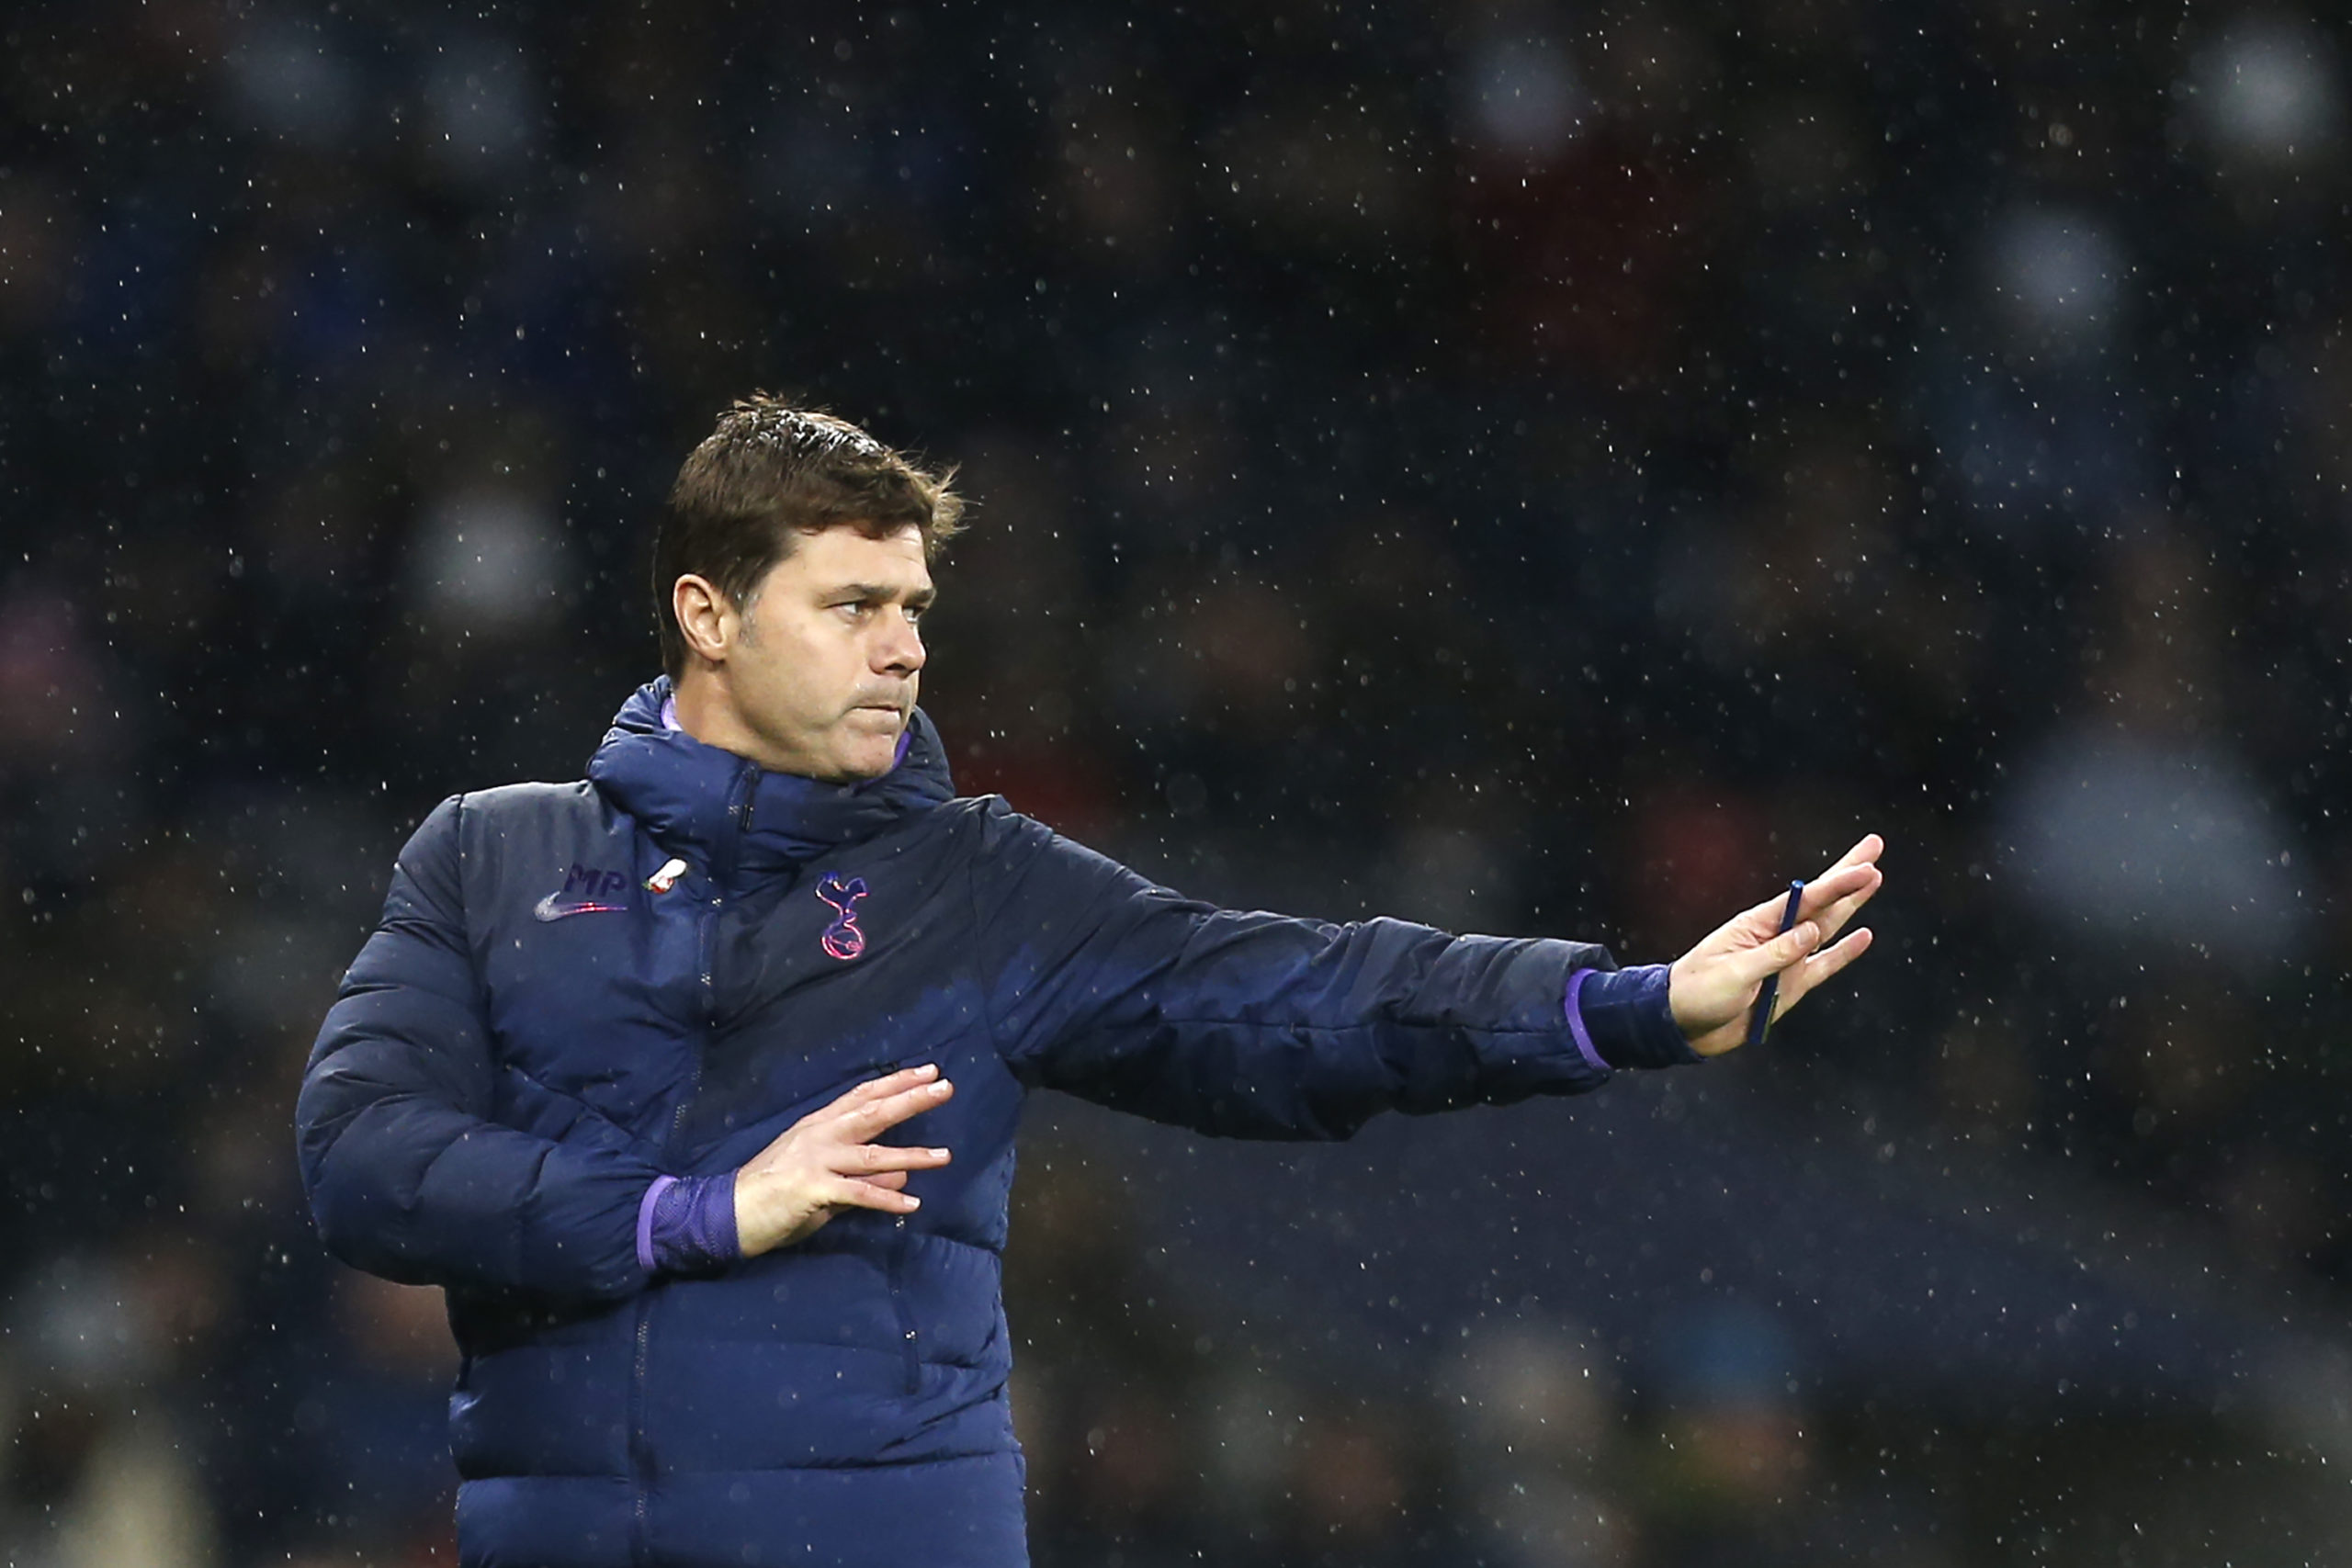 Rumoured Celtic managerial target Mauricio Pochettino signs with PSG